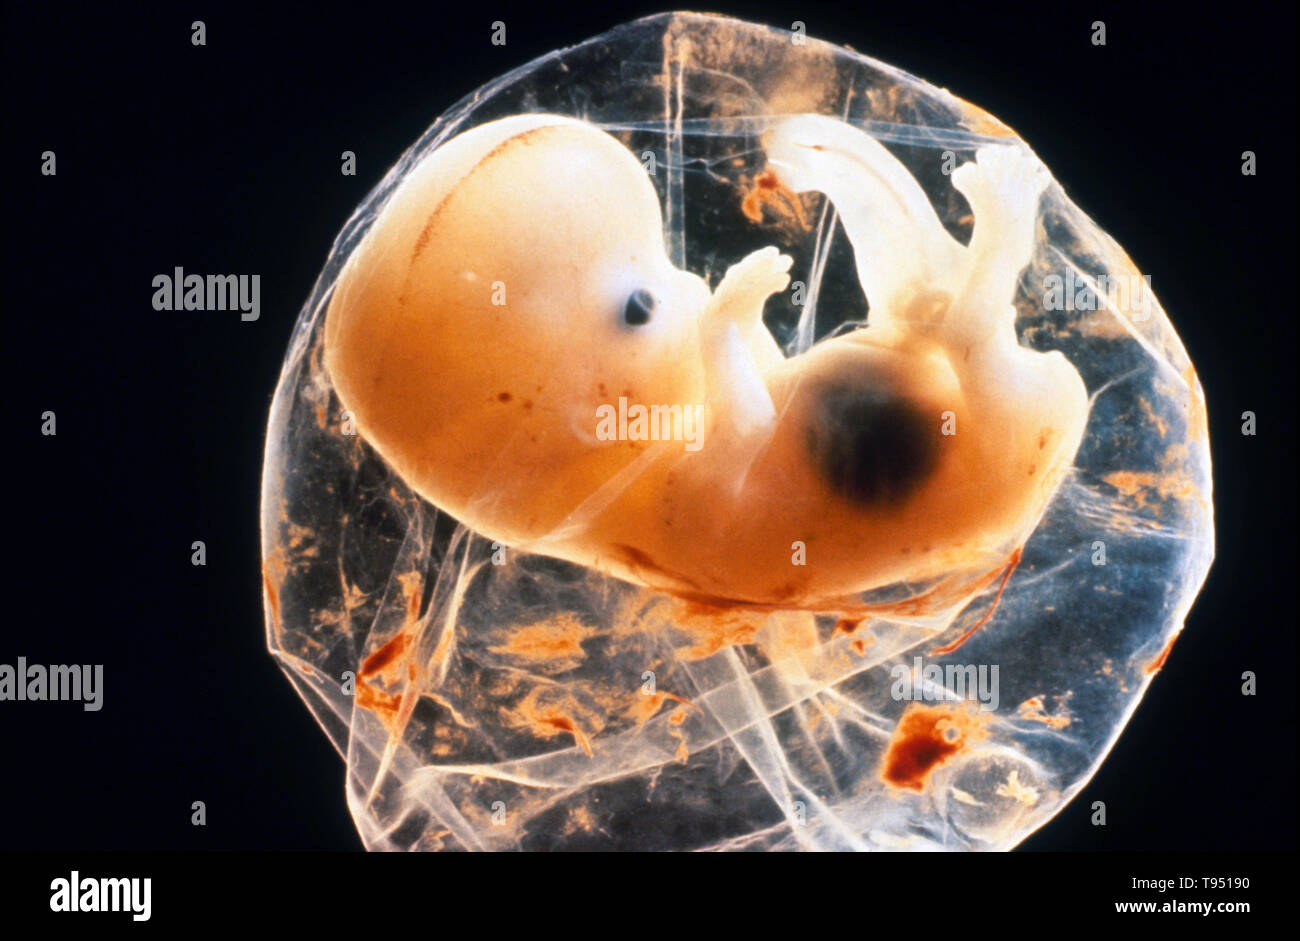 Human fetus in membrane at 6 weeks. Eye and limbs visible. Focus is on organ differentiation at this stage. Subsequent stages of development focus shifts to growthg of fetus. Stock Photo